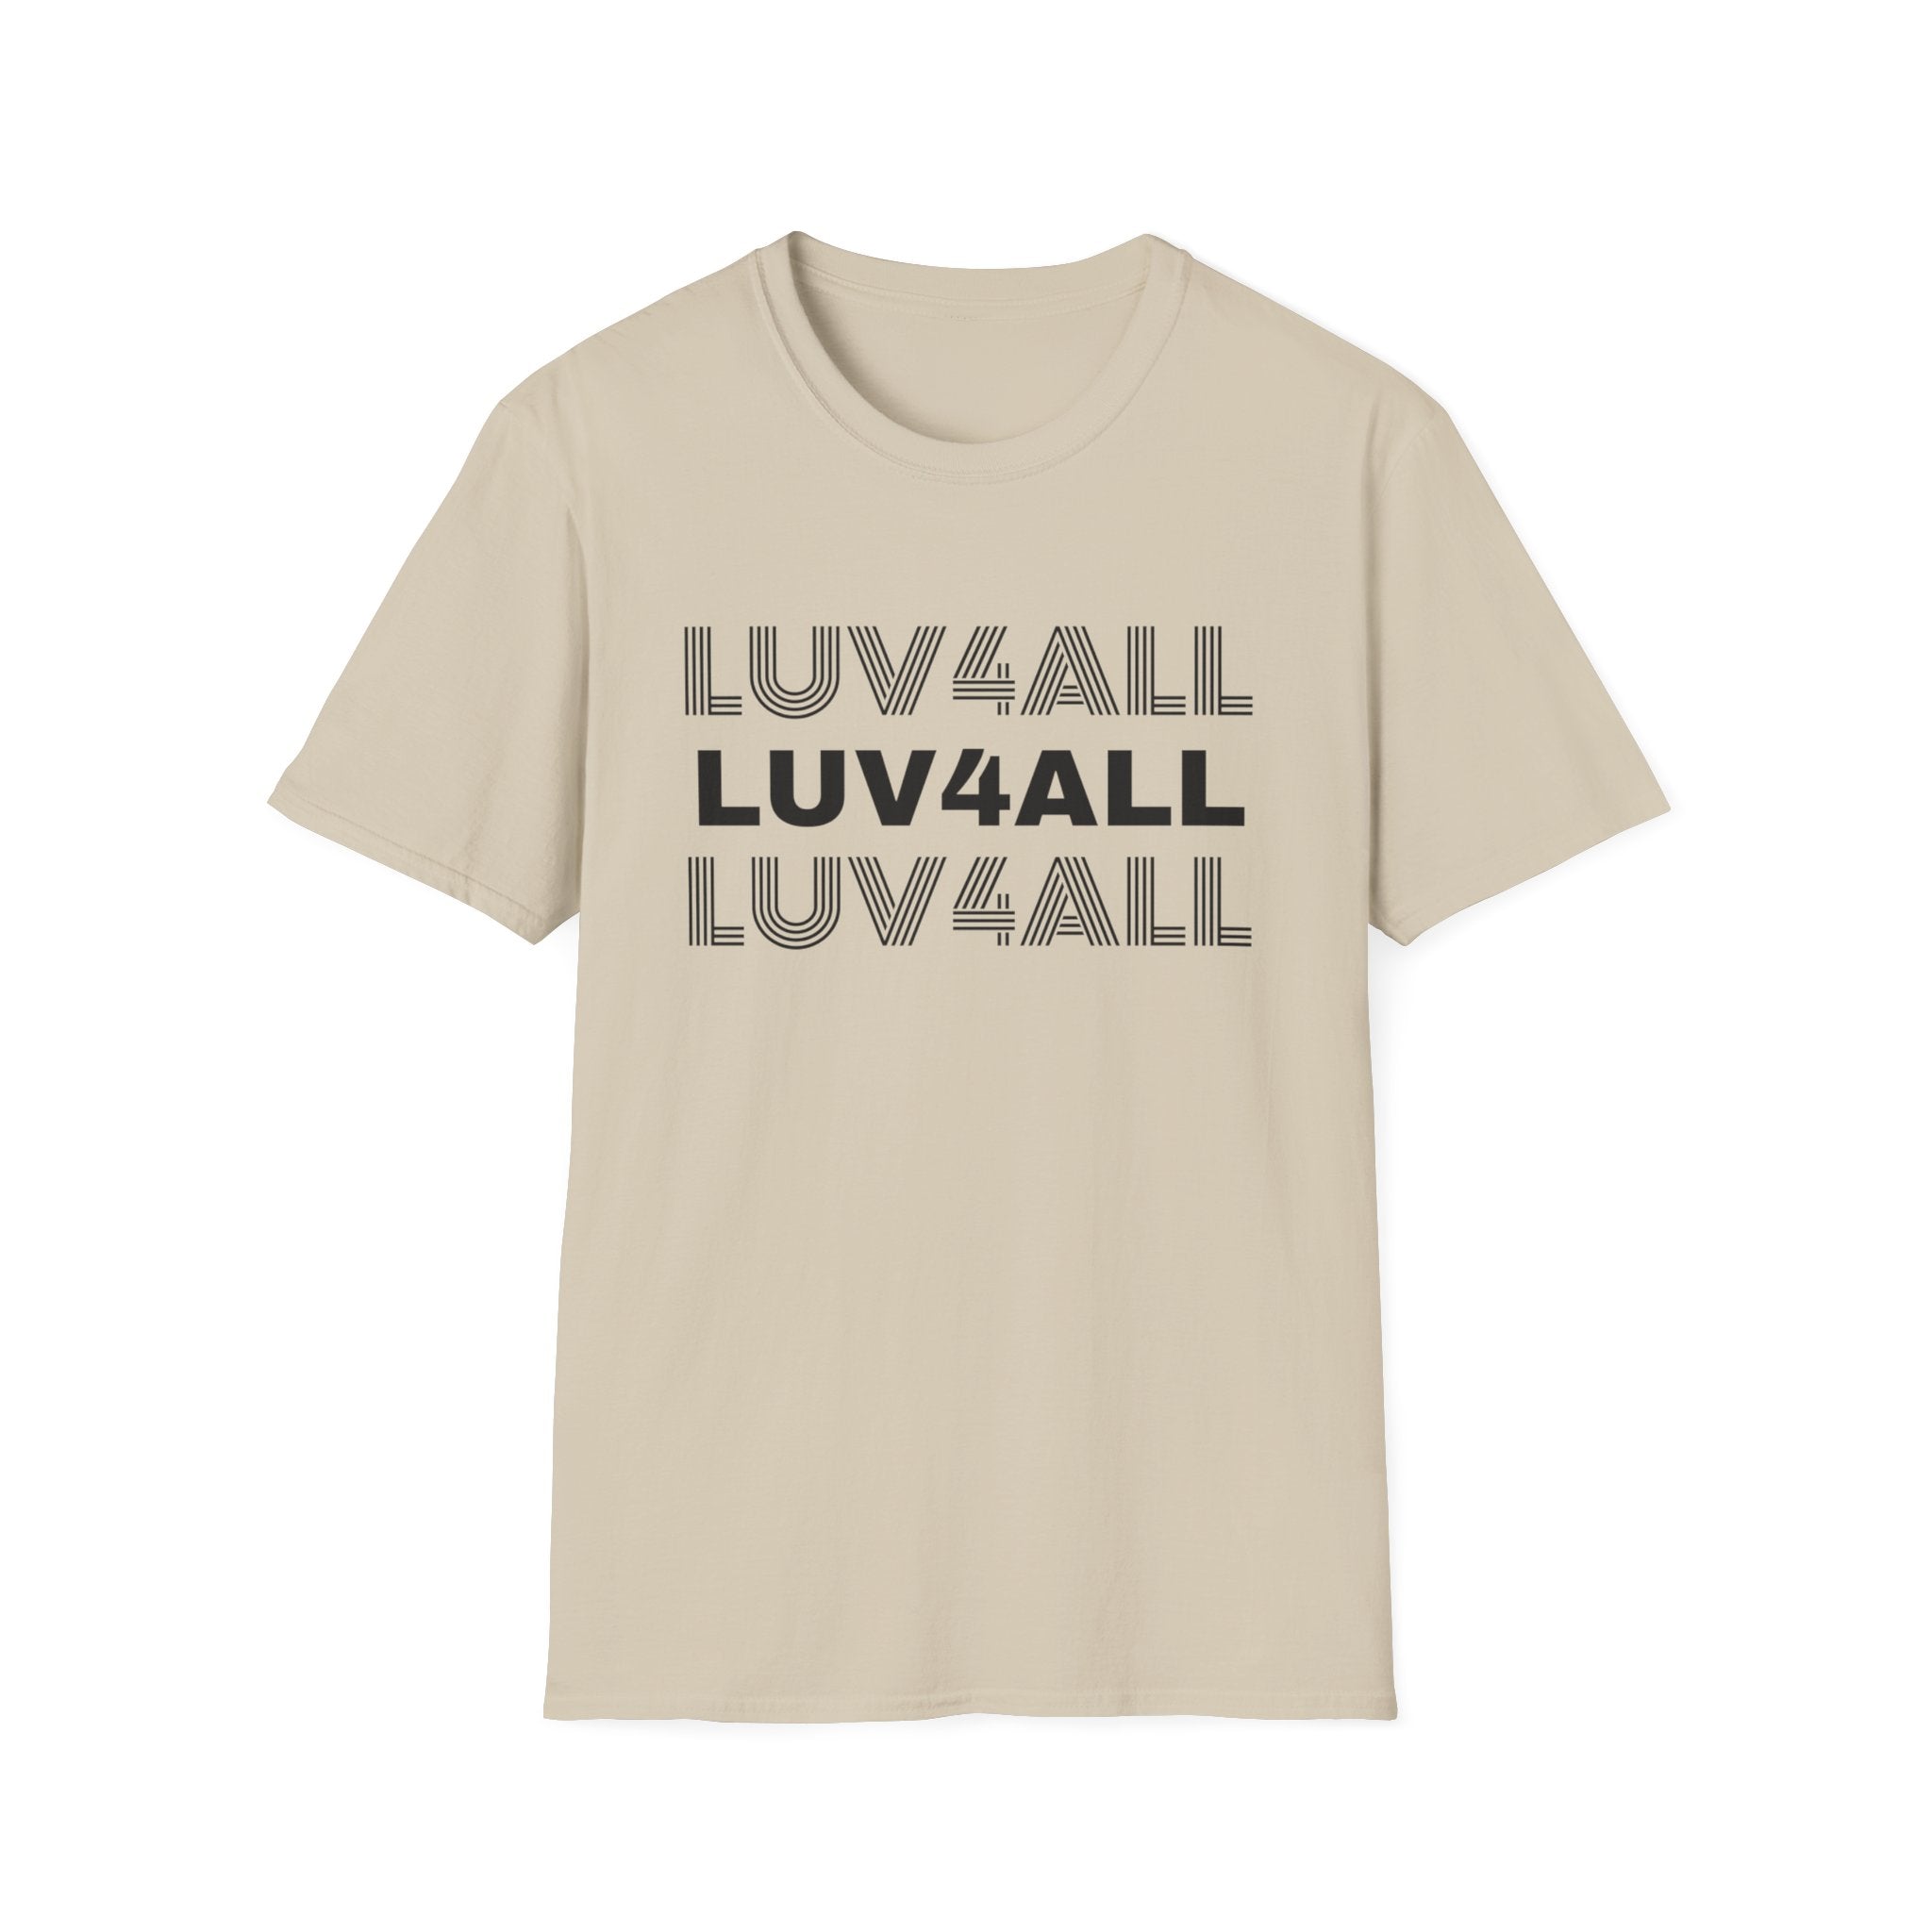 Luv4ALL Unisex Softstyle Crew Neck T-Shirt, Kindness Shirt